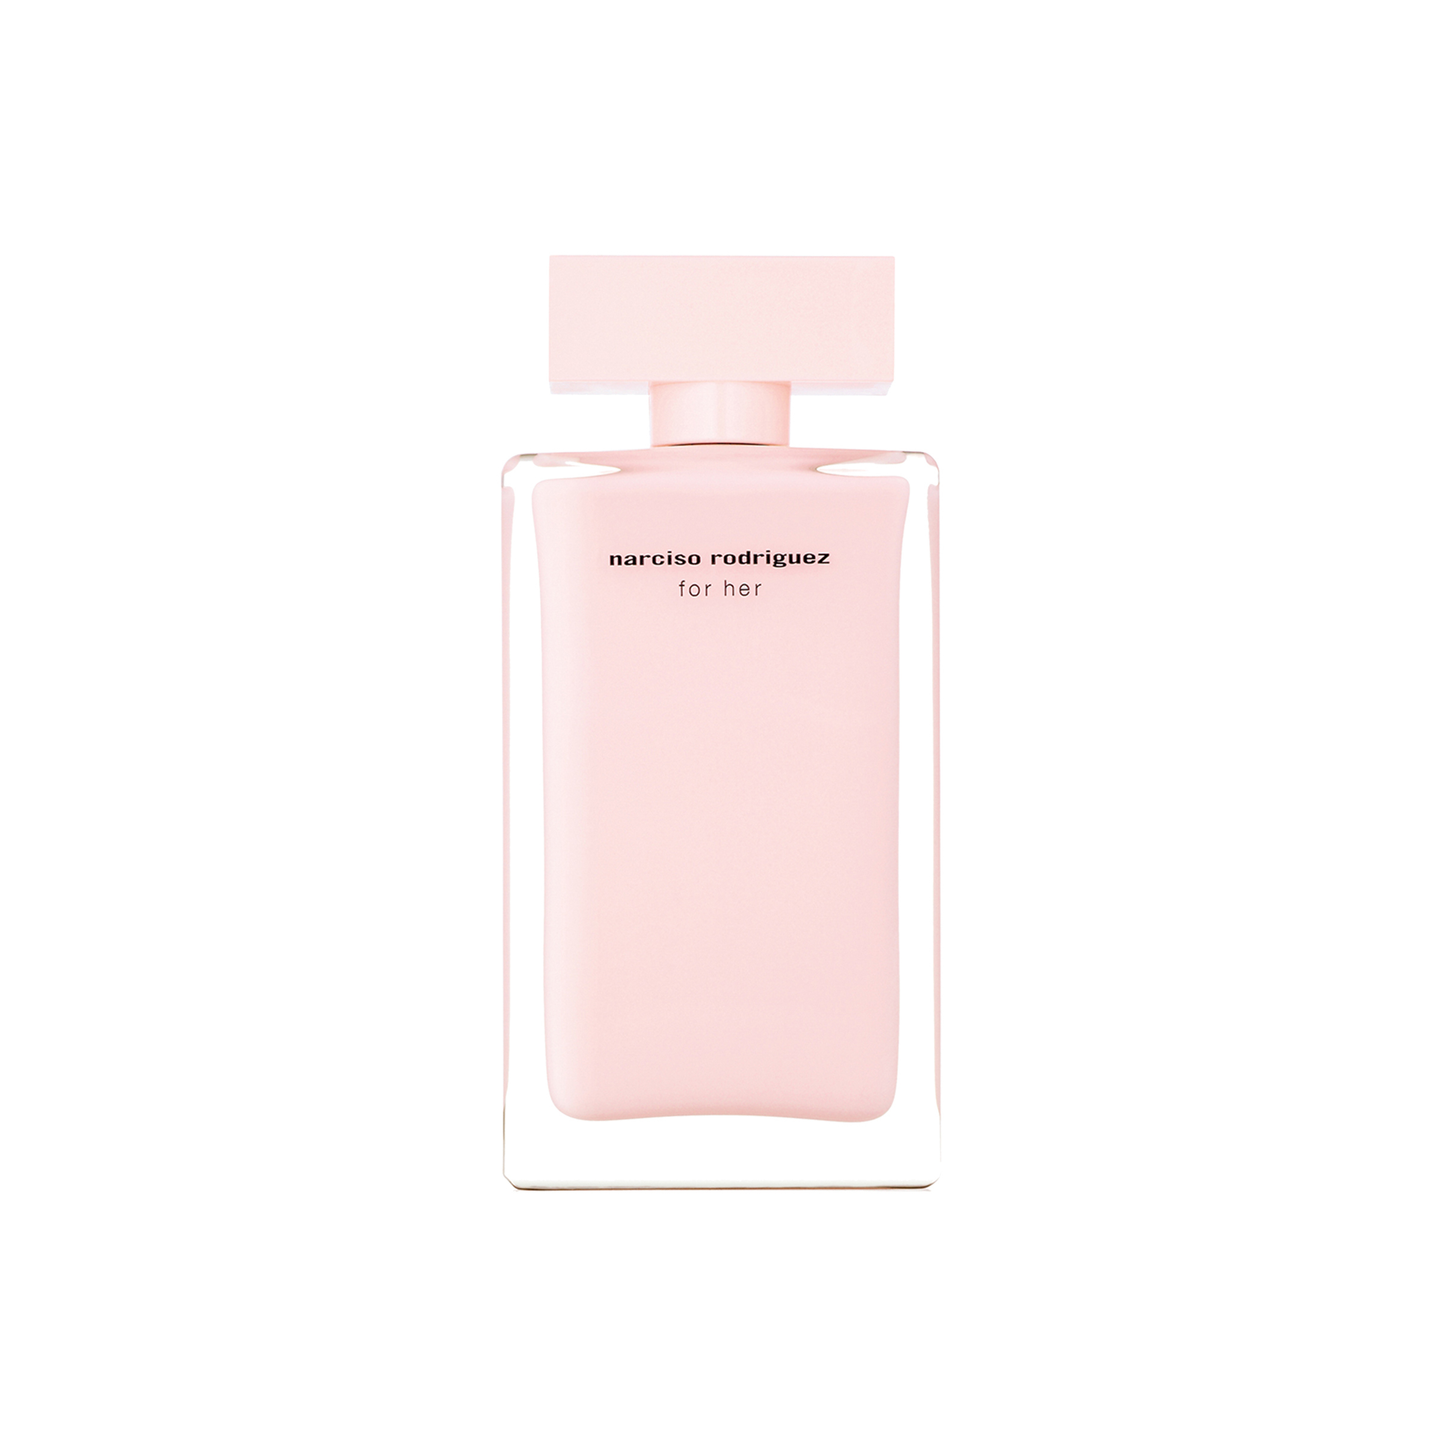 Narciso Rodriguez - For Her - Edp - 100ml